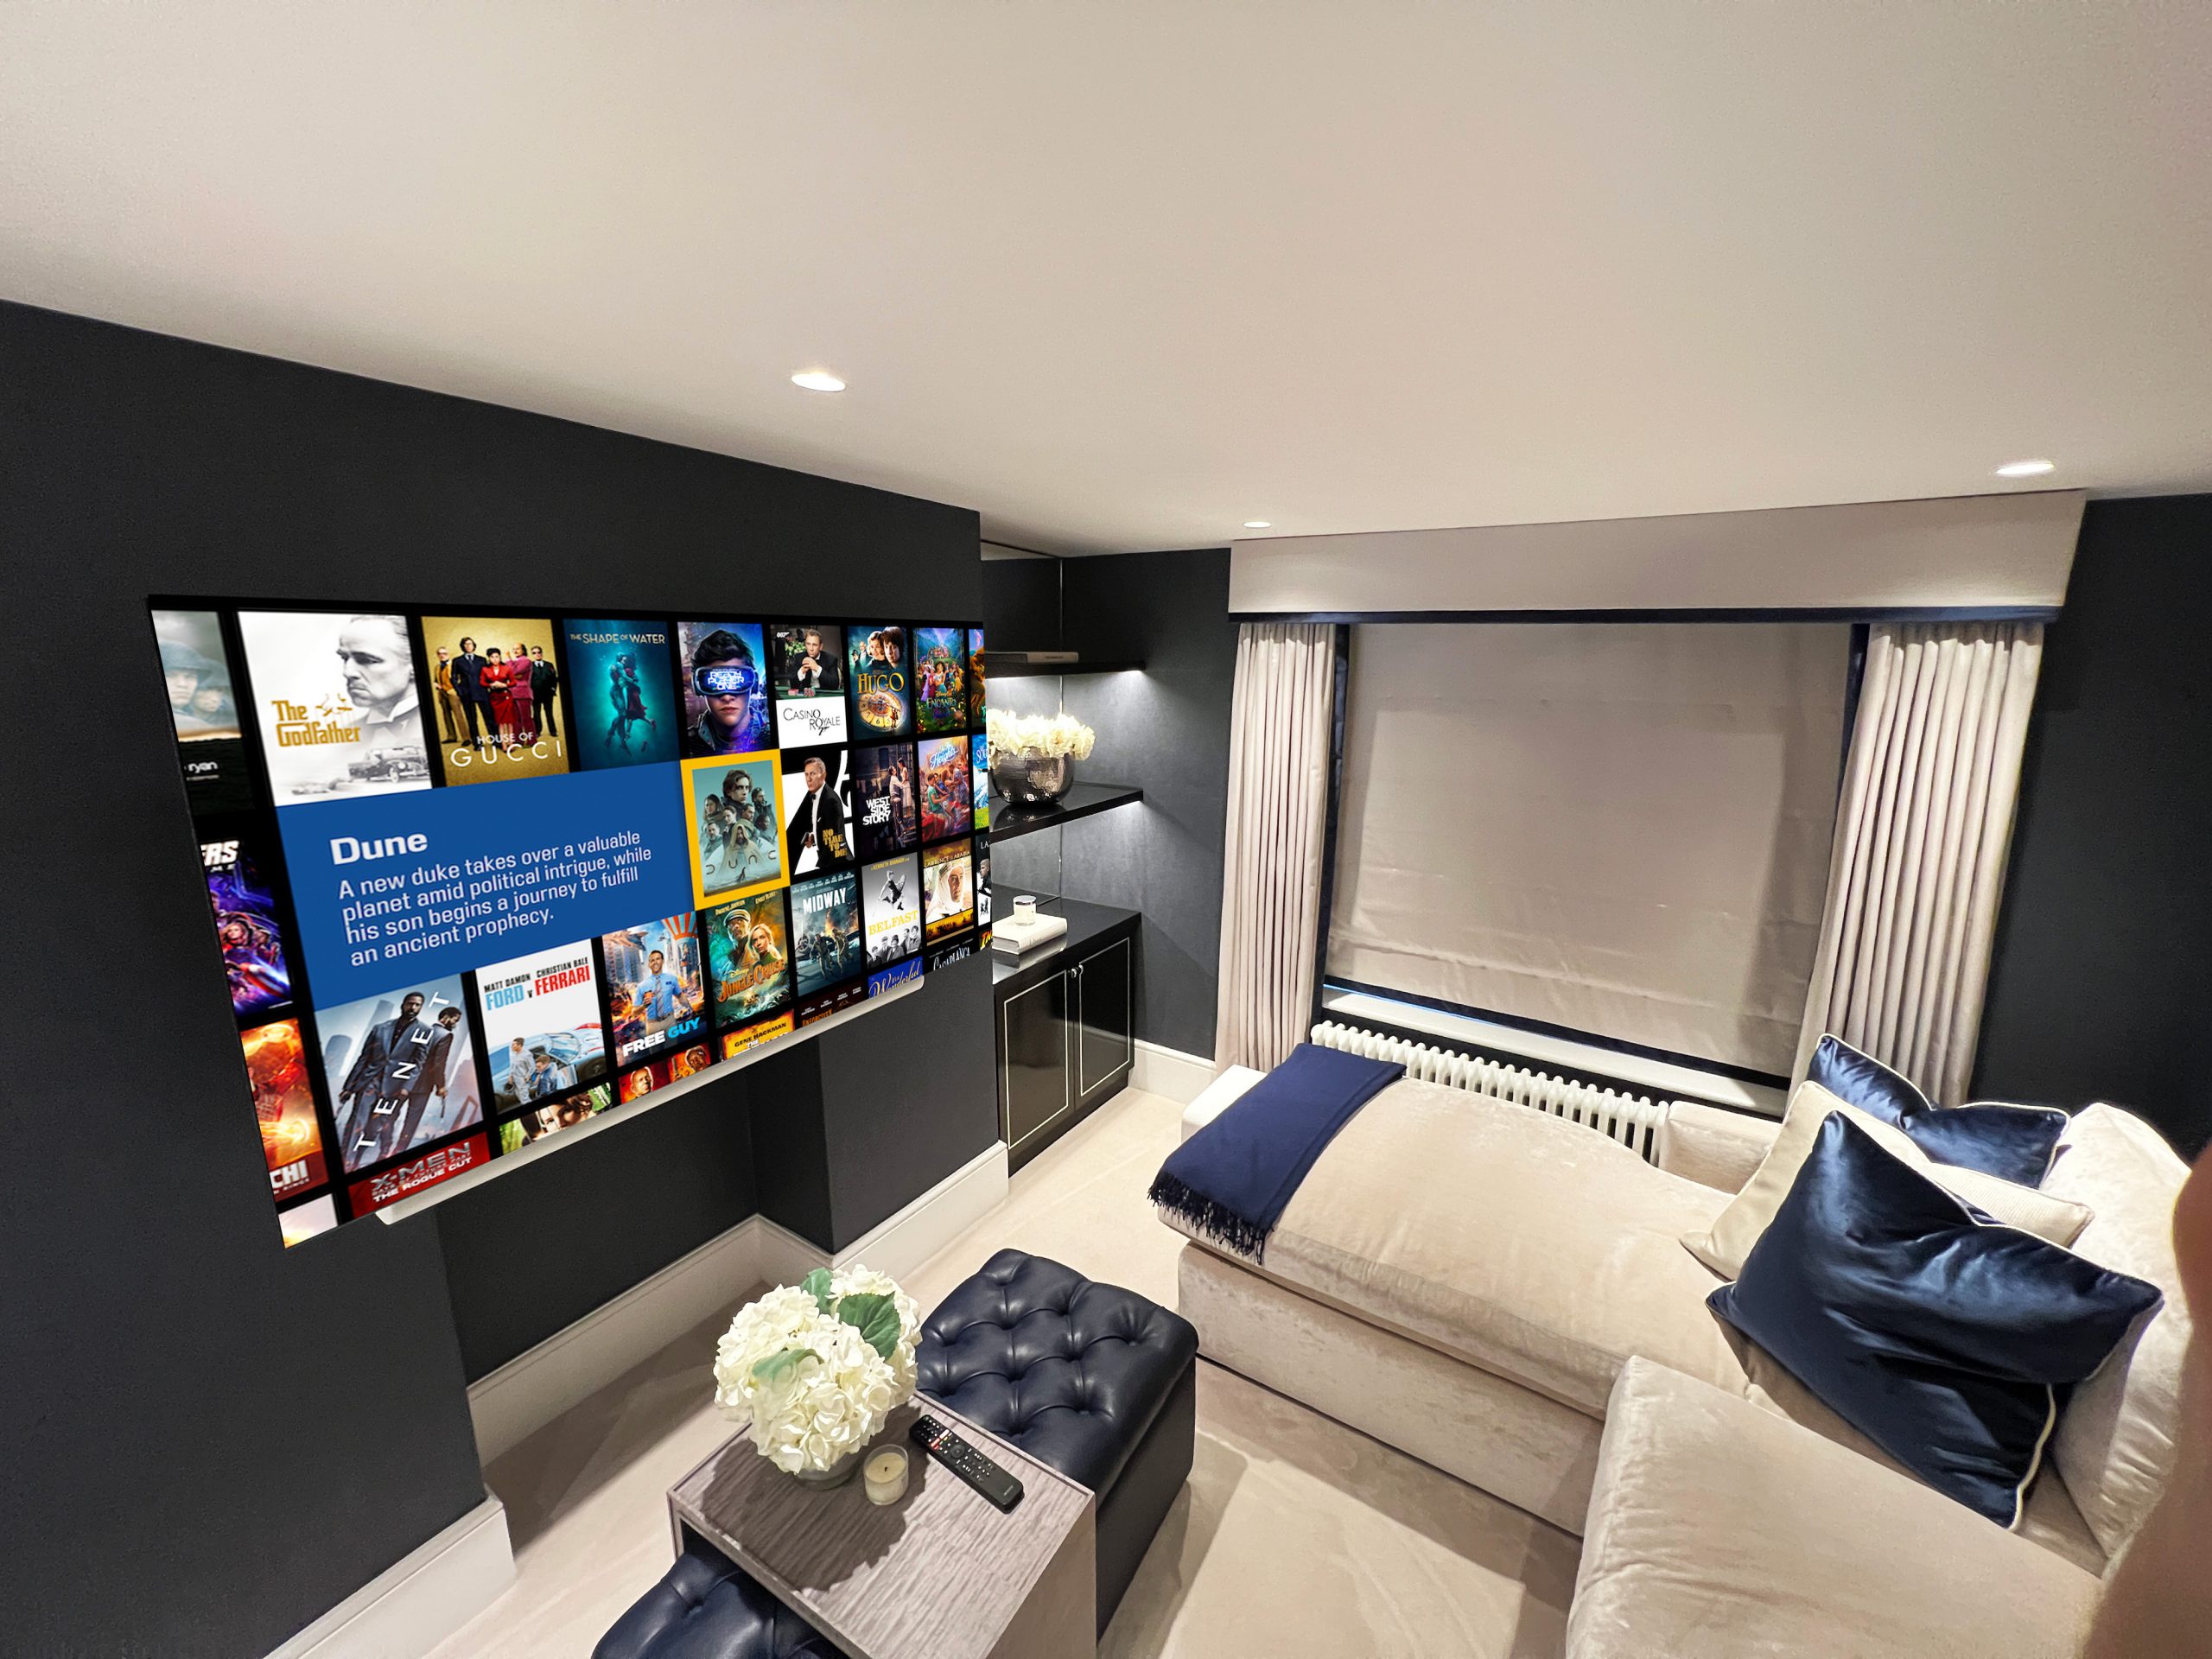 Shows a small sized media room, often clients ask us how big should a home cinema room be?